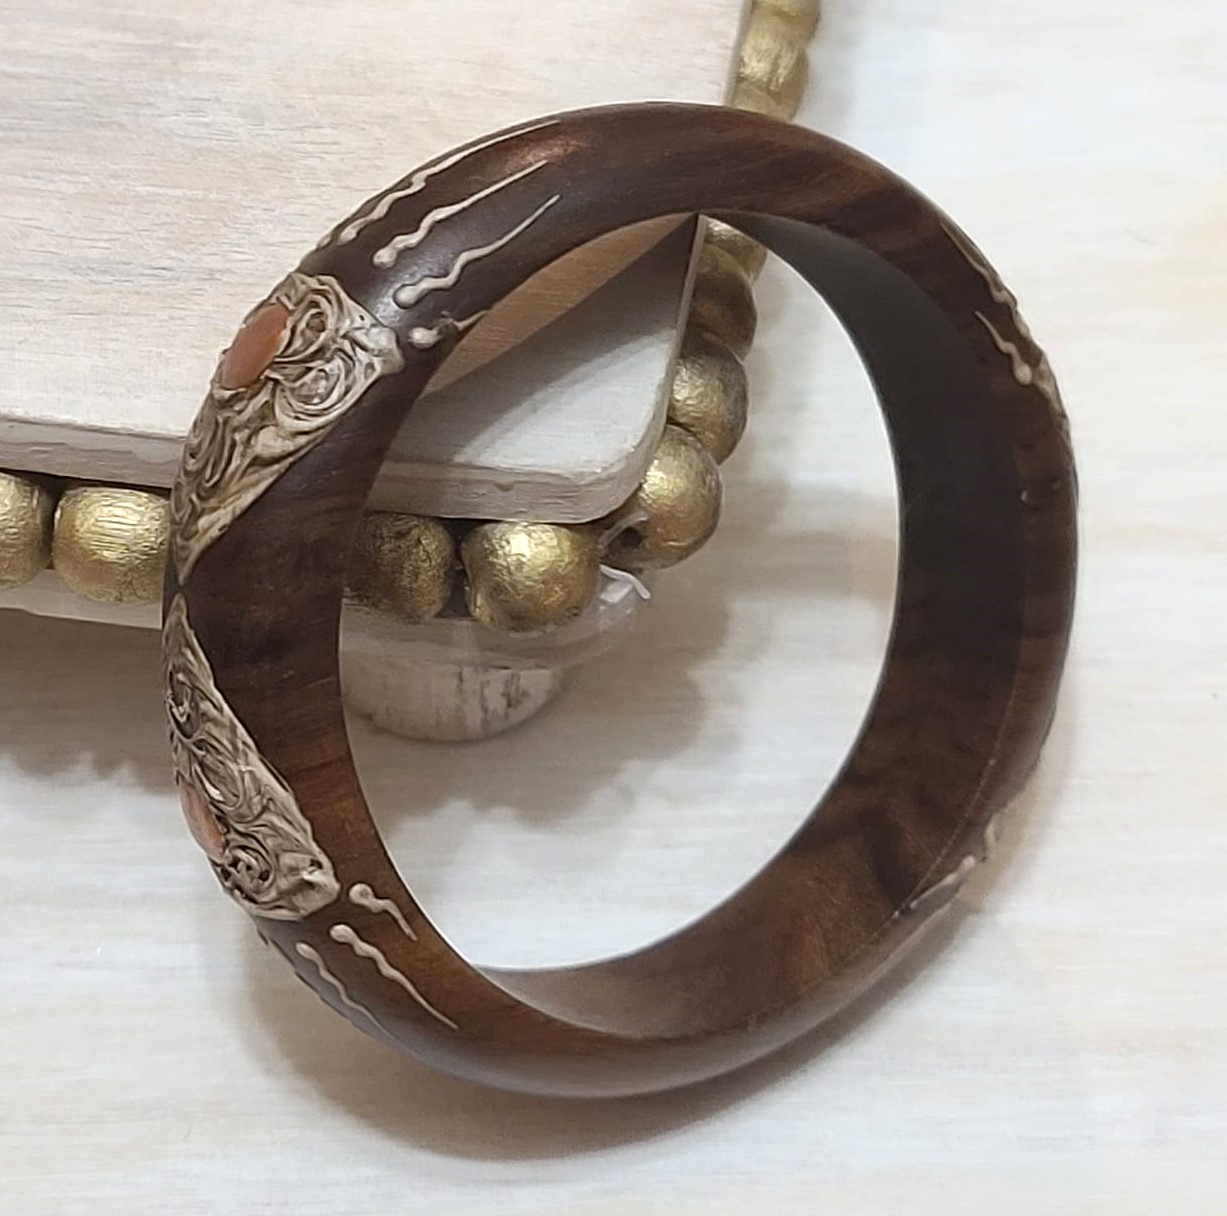 Wood bangle bracelet with copper accents